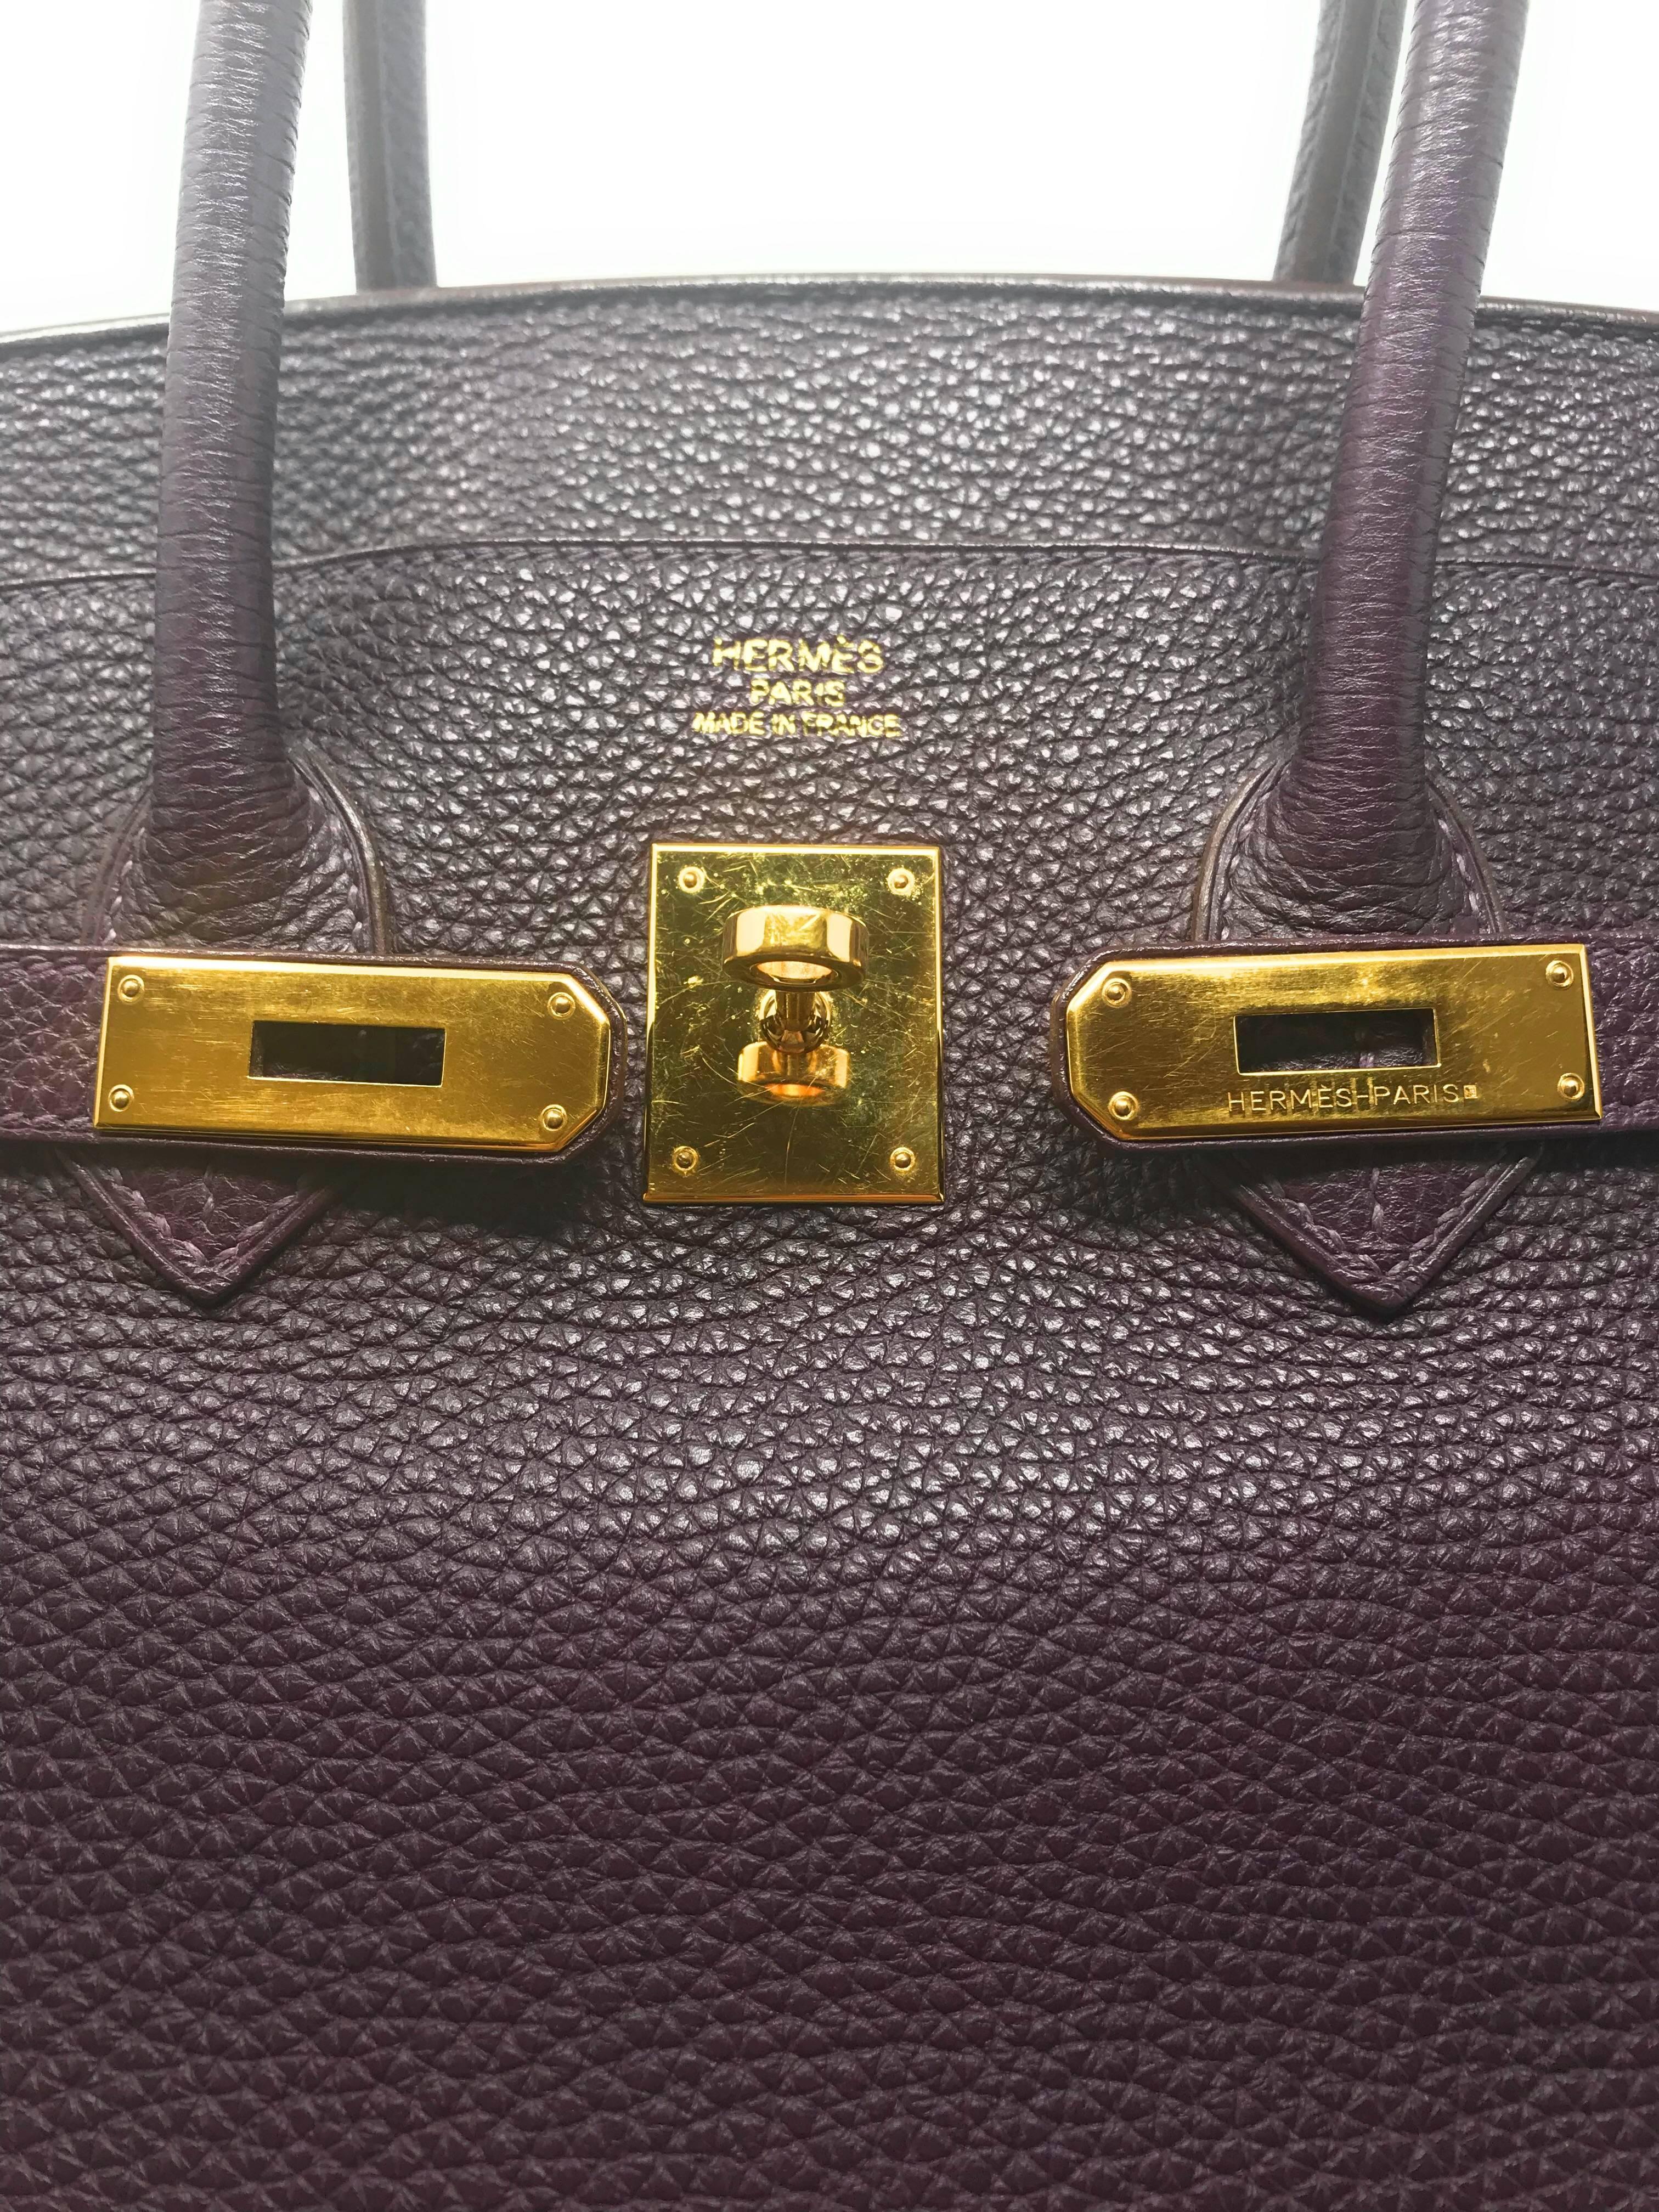 Lush purple paired with gold! A great combination which makes up the colors of this Hermes Birkin bag. 
This is the 35cm size crafted in Togo leather with two rolled top handles and a frontal flap closure. The Gold plated hardware including the